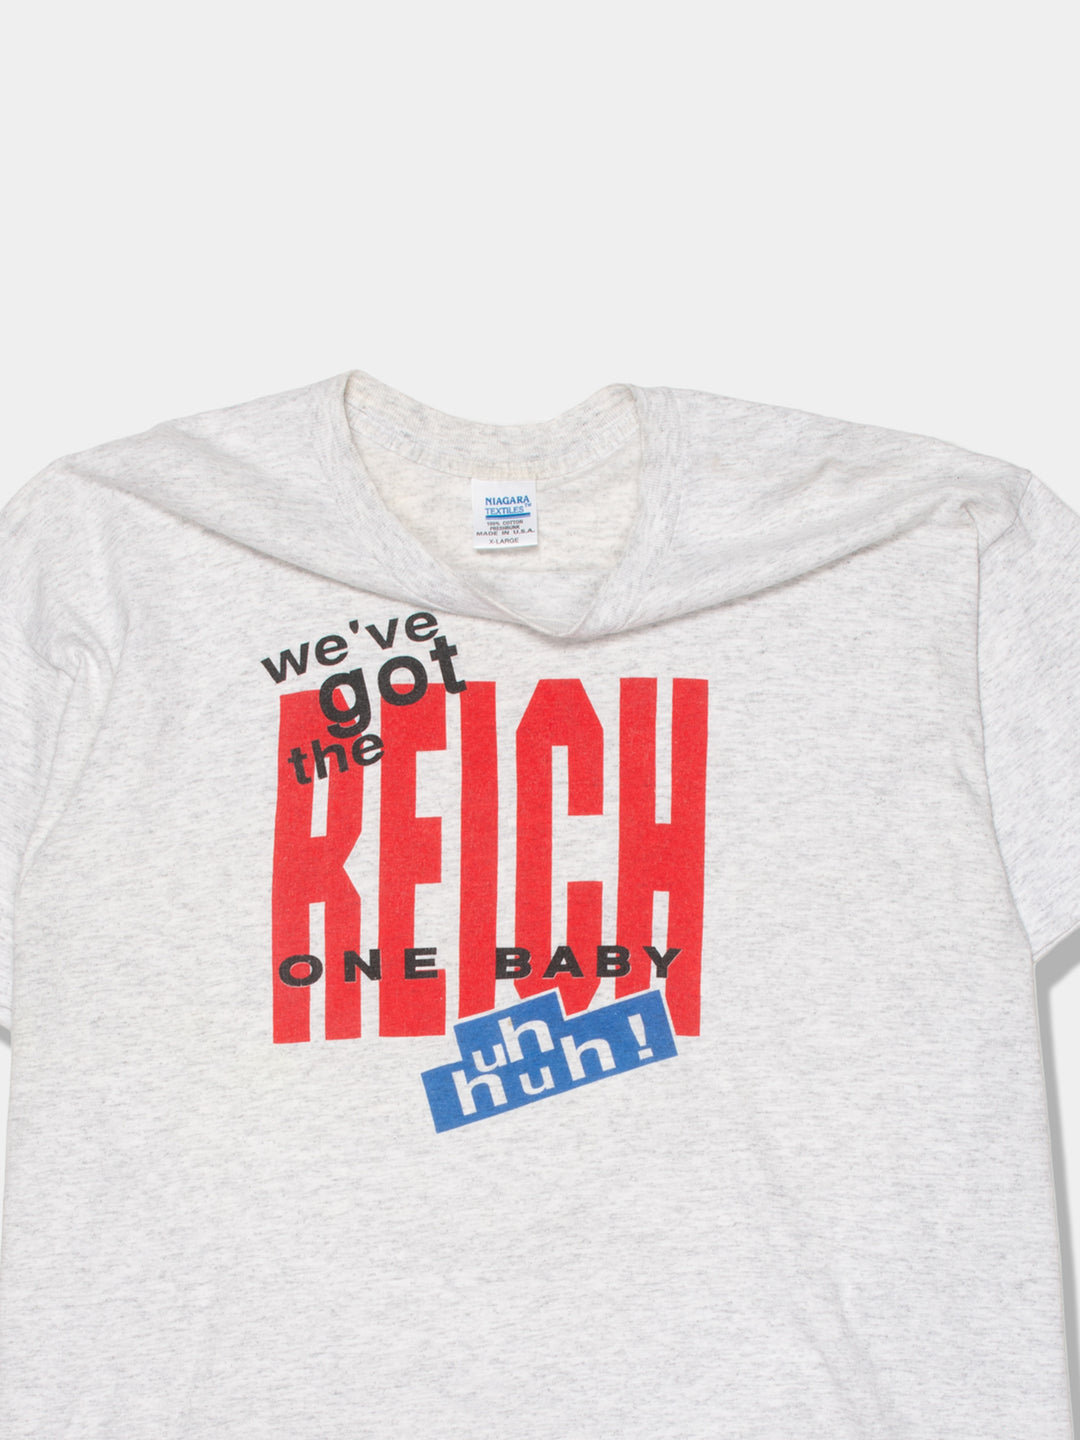 80s The Reich One Tee (L)